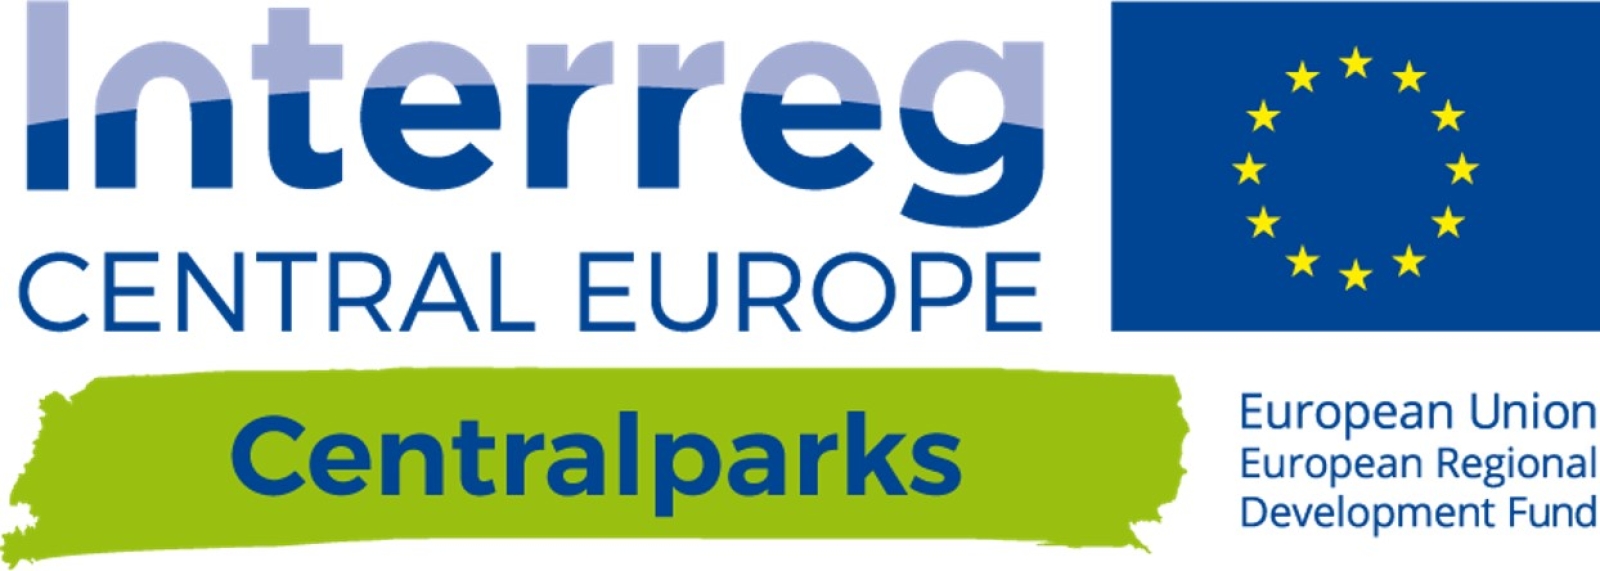 Centralparks Project - Final Conference